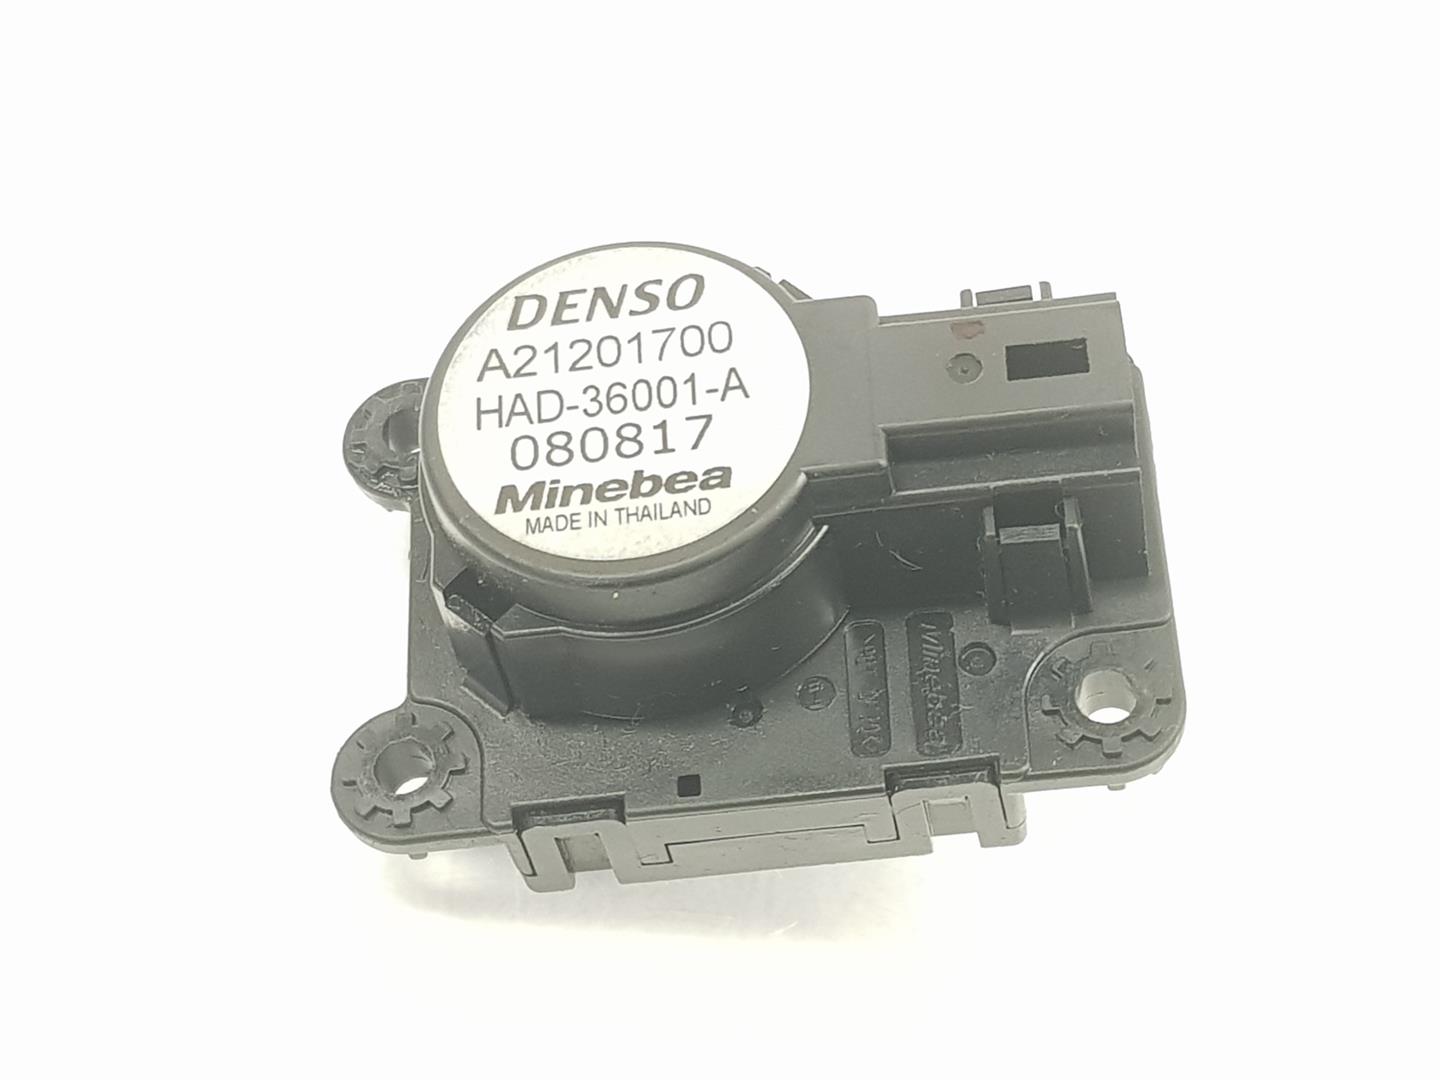 PEUGEOT 3008 SUV (2016-present) Air Conditioner Air Flow Valve Motor A21201700, A21201700 24208545